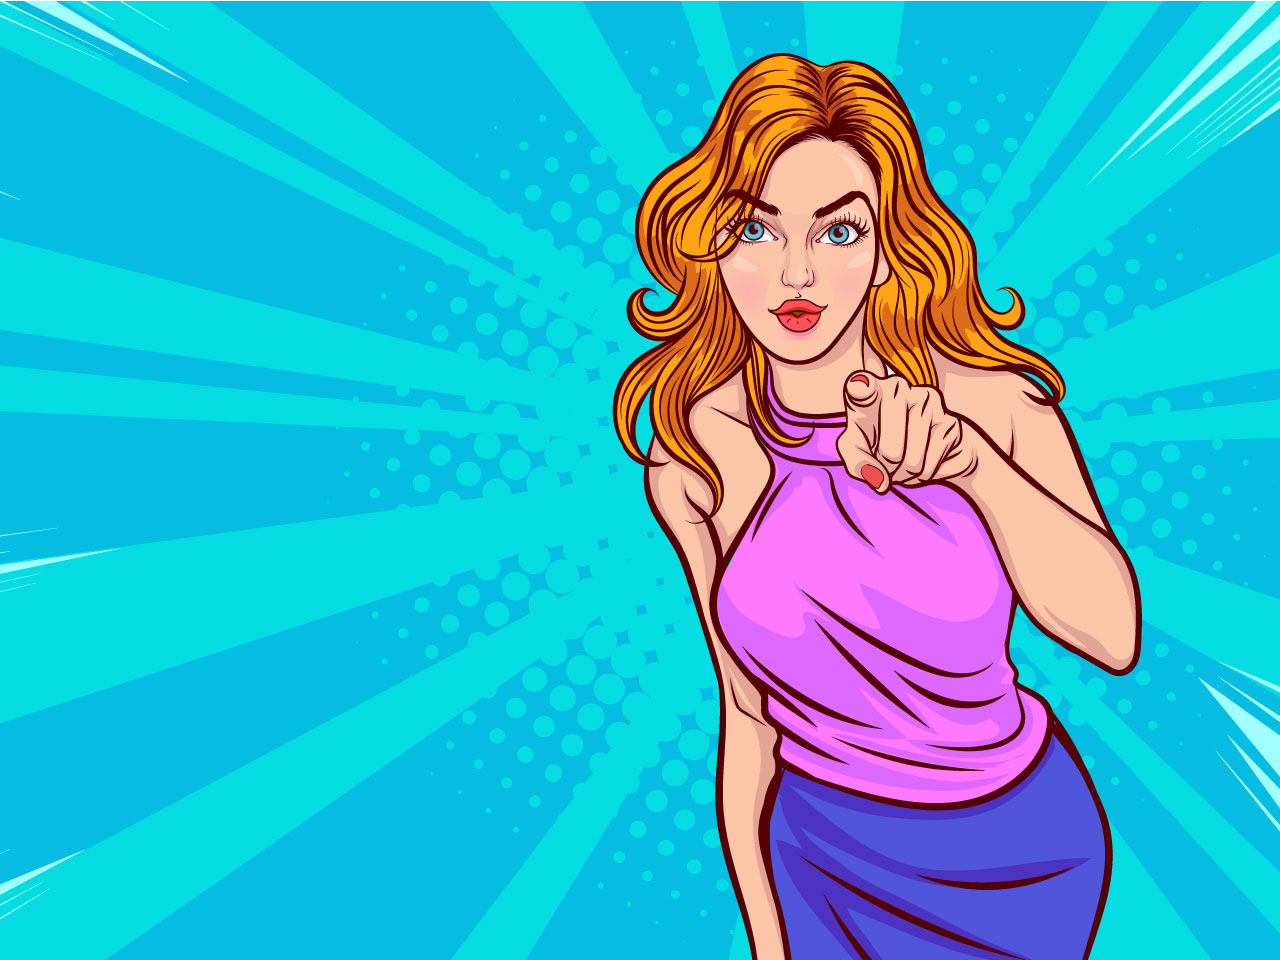 Woman finger pointing call attract attention girl expressing interest pop art comic style clipart image